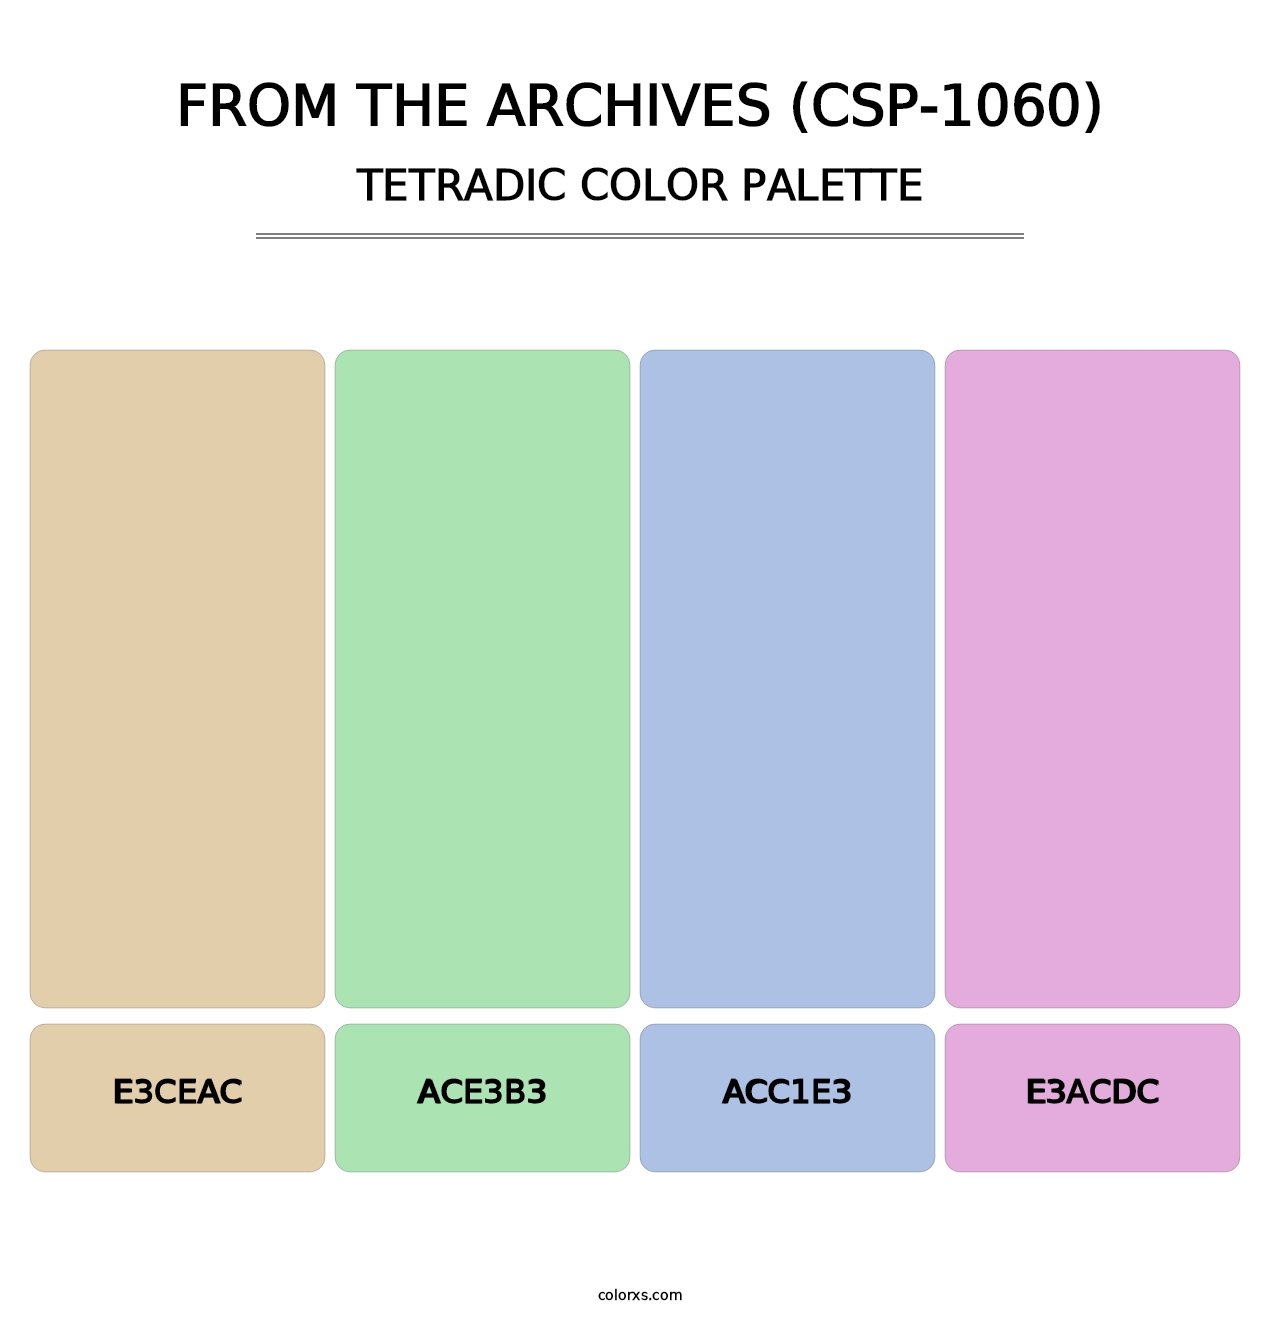 From the Archives (CSP-1060) - Tetradic Color Palette